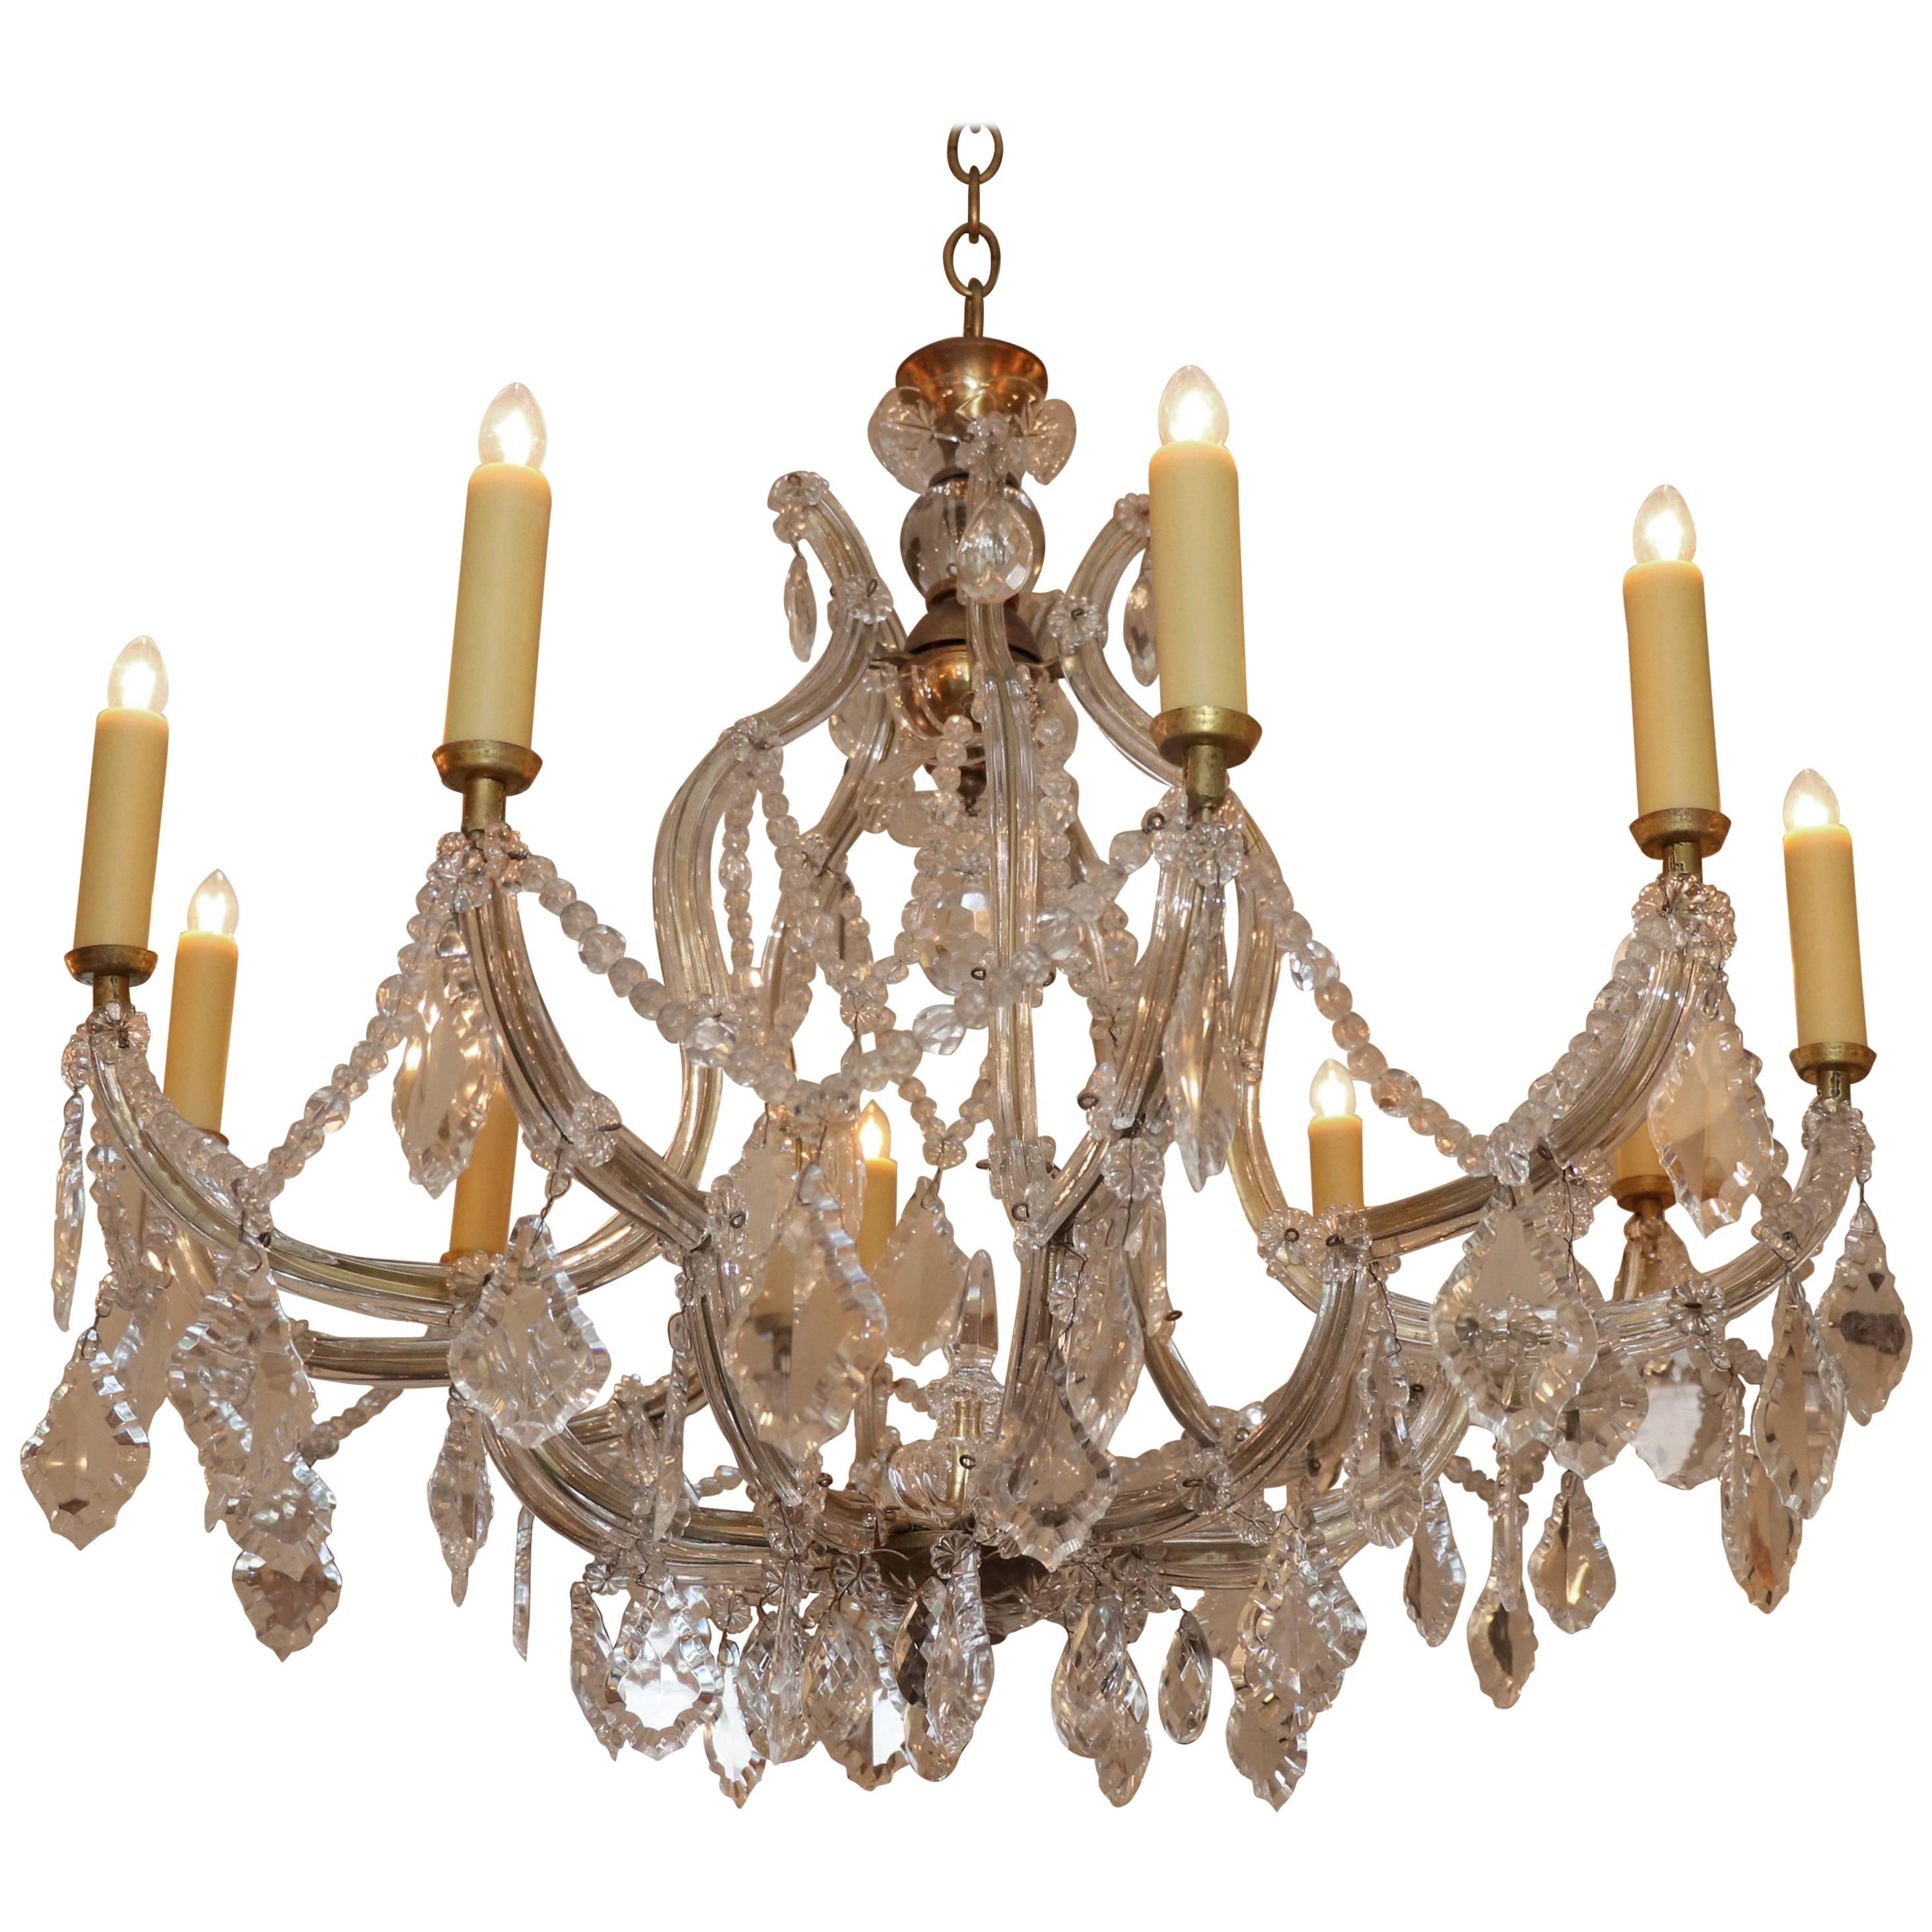 Large Vintage French Maria Theresa Style Crystal Chandelier with Ten Lights